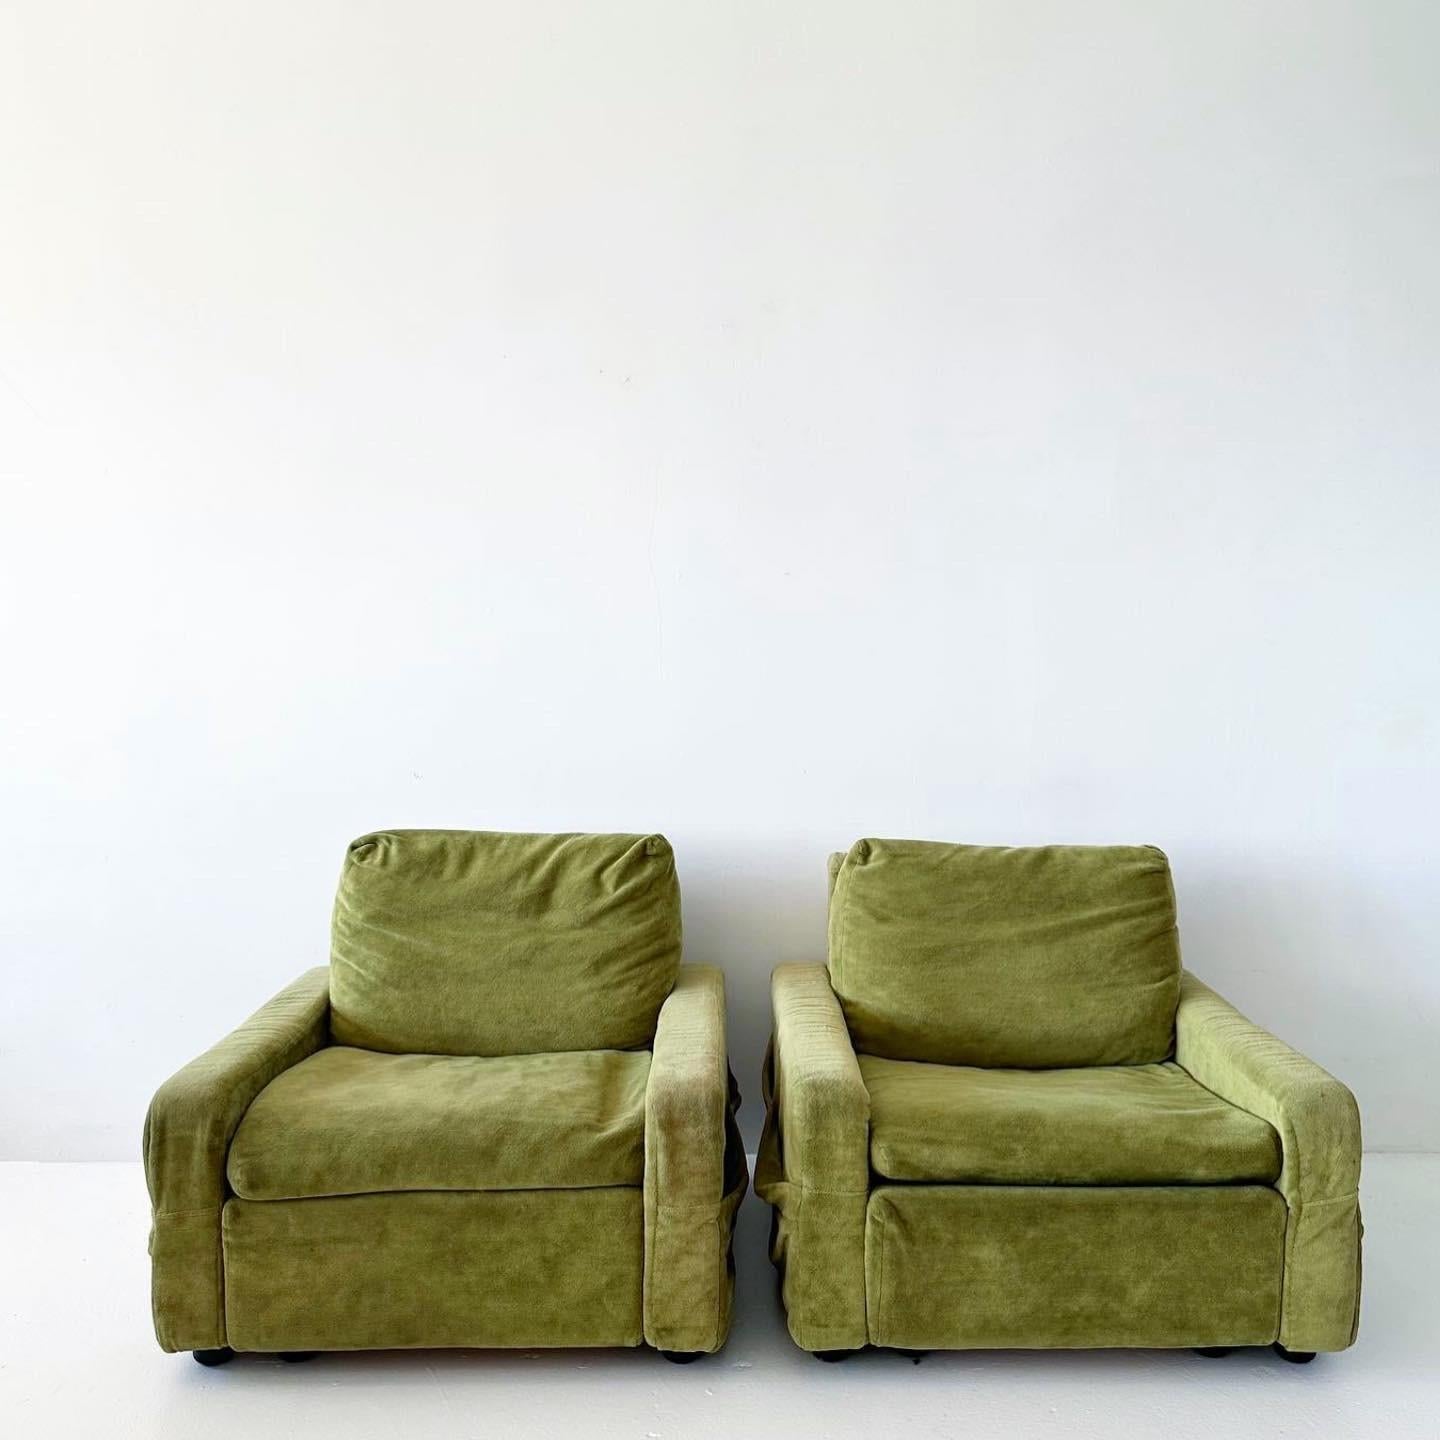 1970s vintage green velvet knoll club chair (2 available) In Good Condition For Sale In Los Angeles, CA